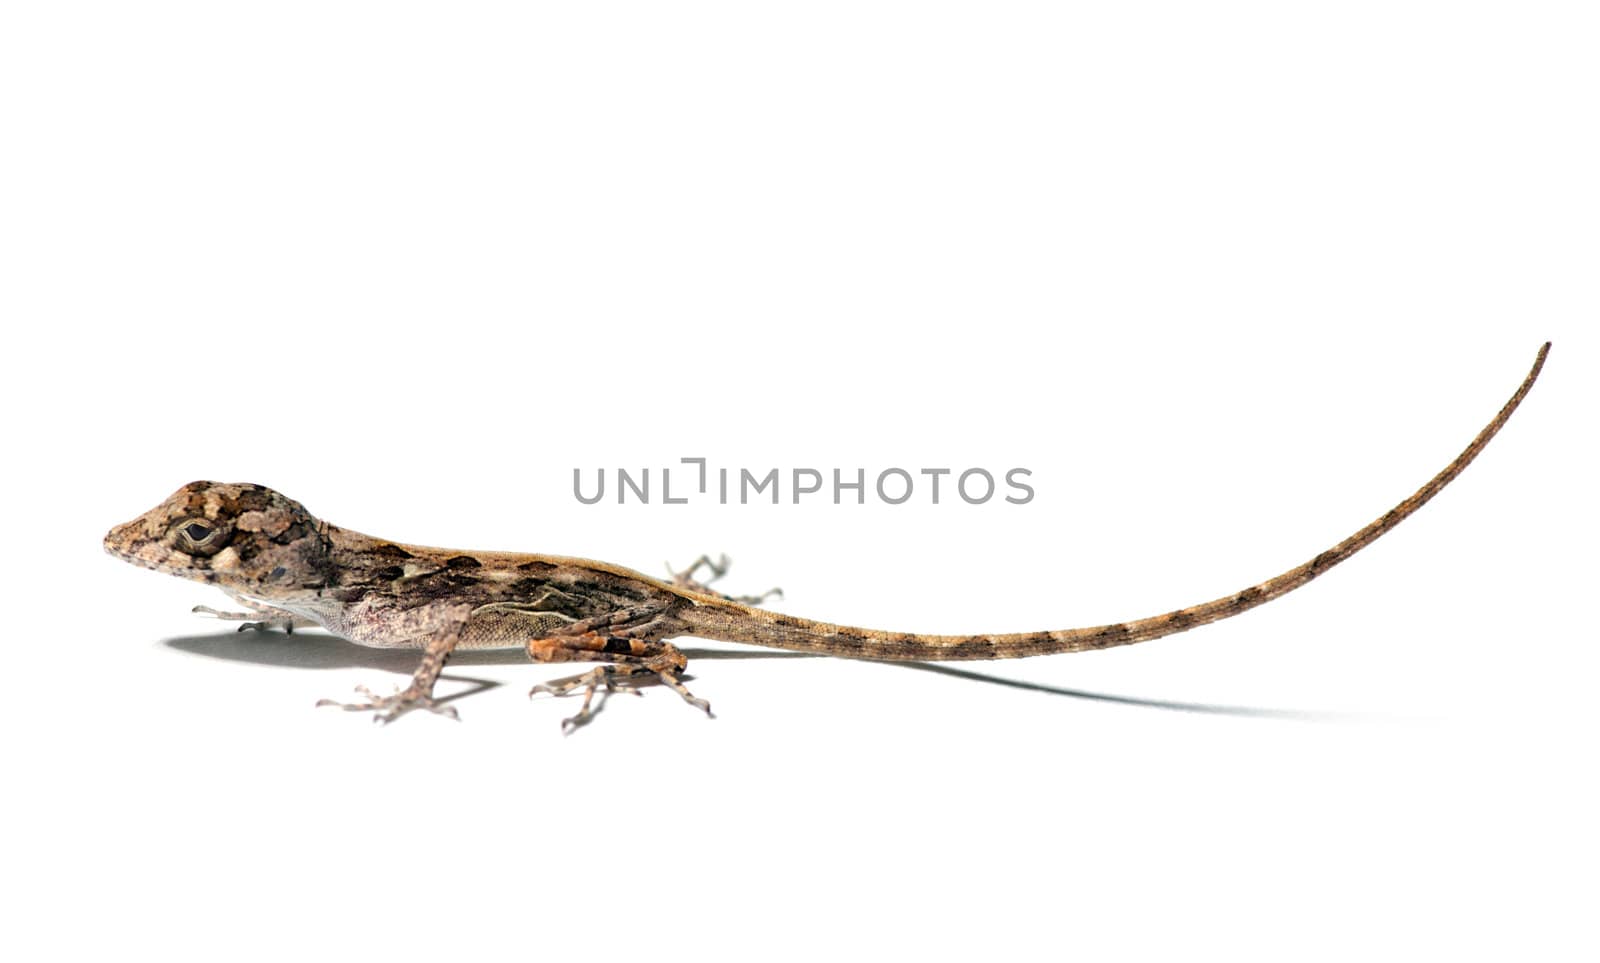 small lizard on a white background